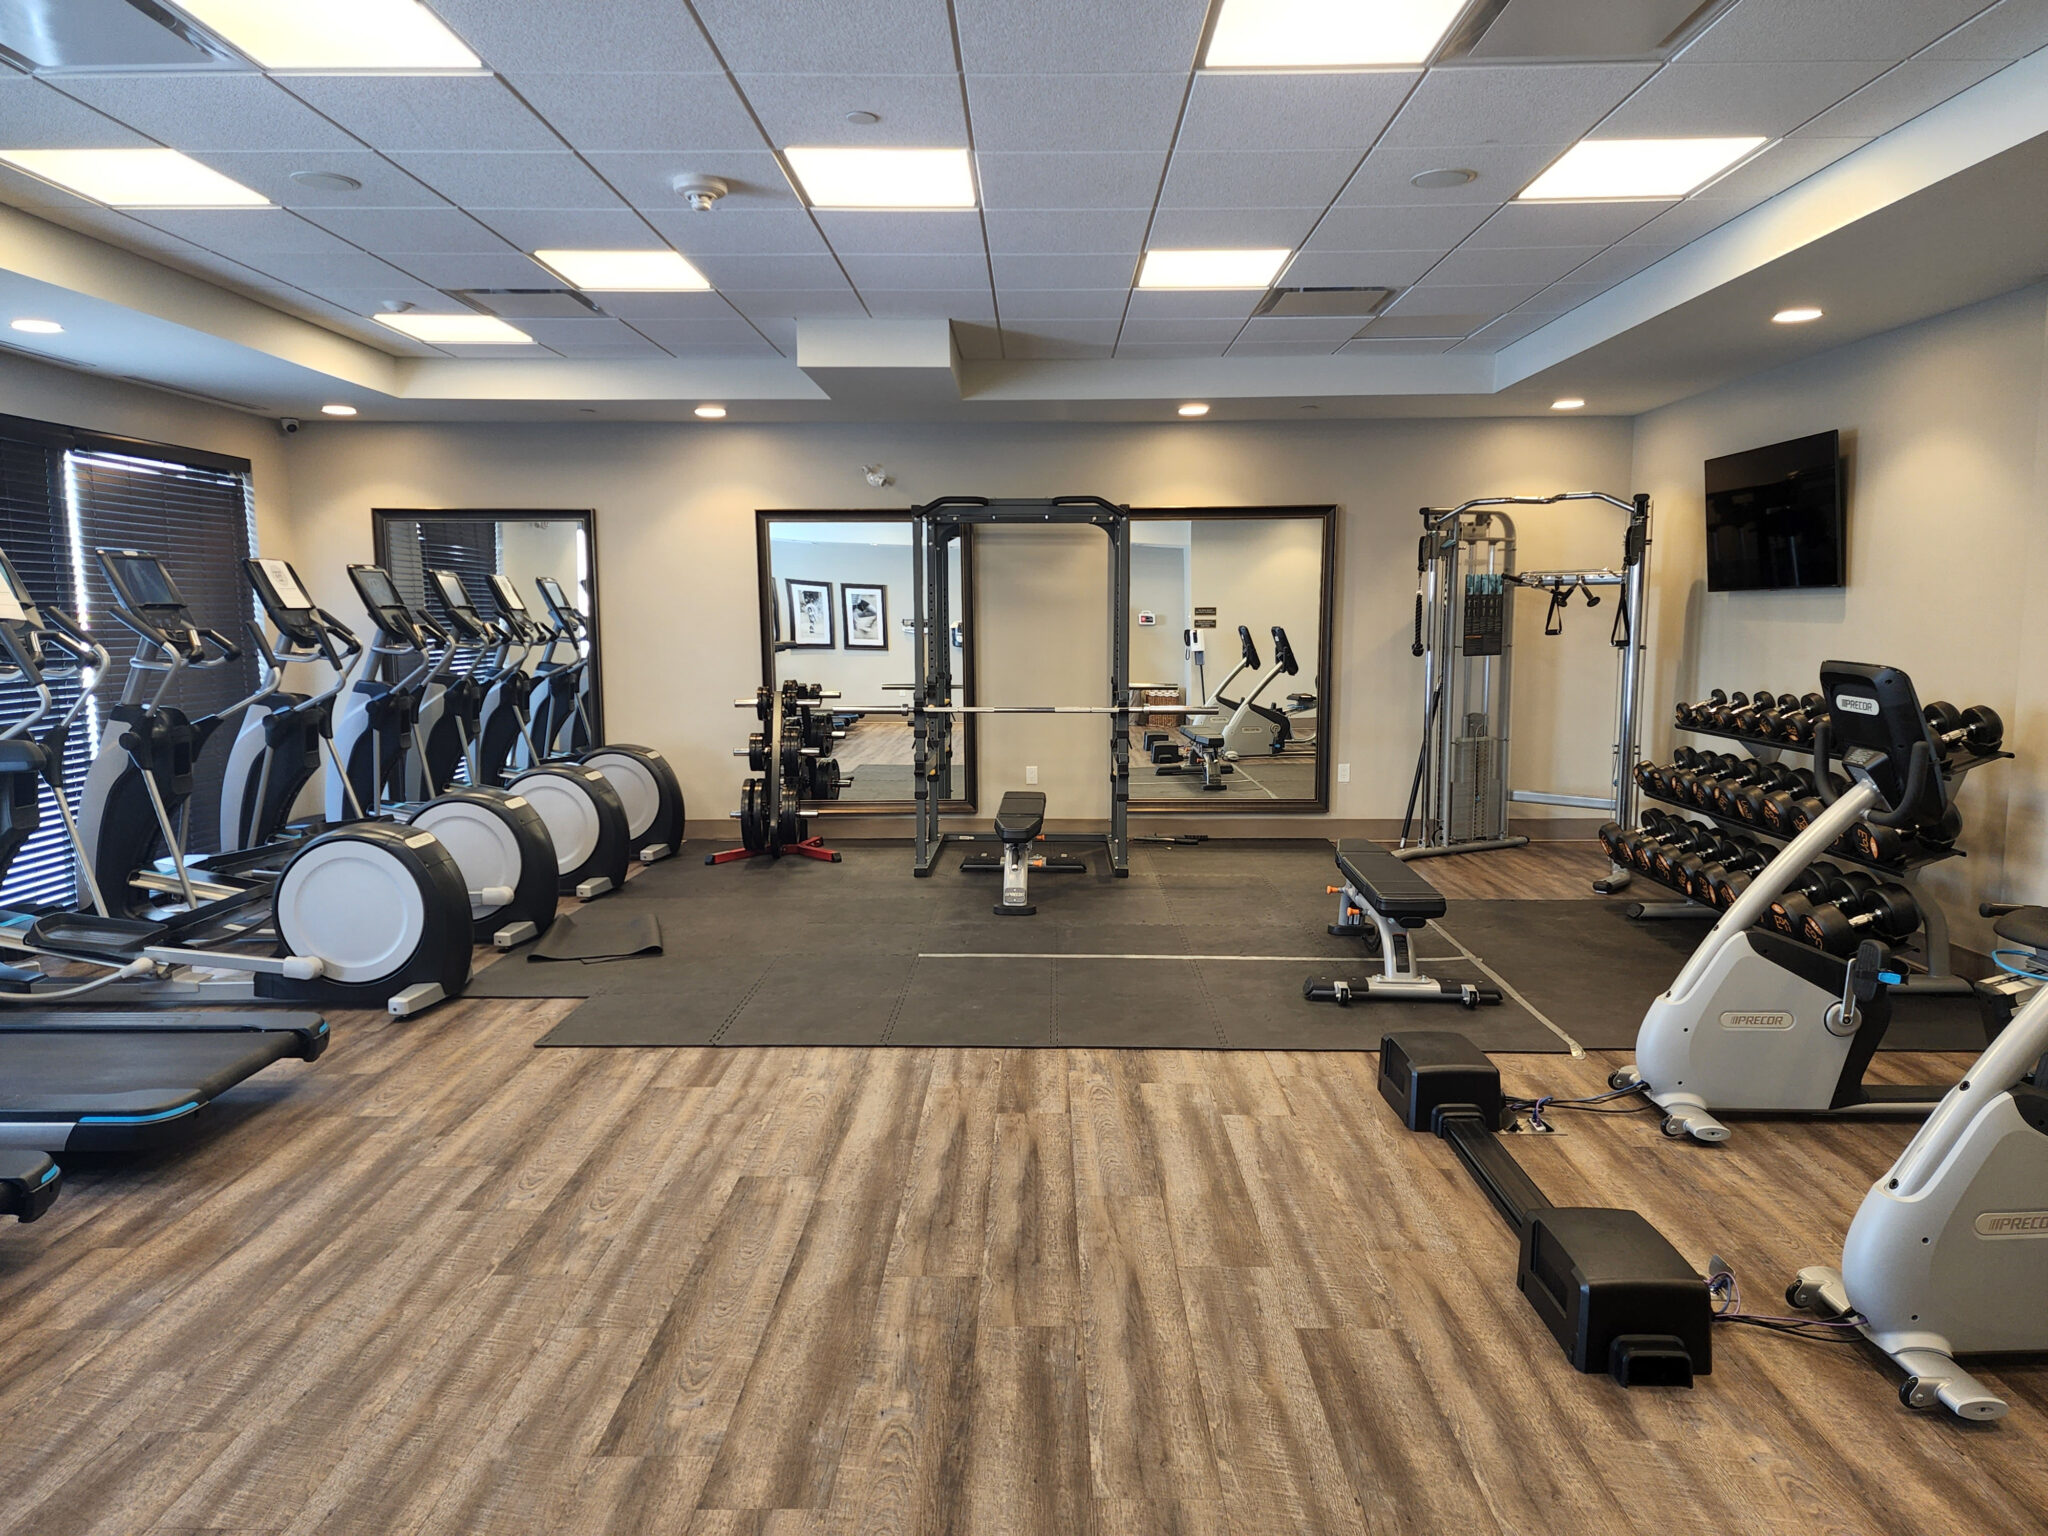 A wide look at the gym at the Staybridge Suites in Waterloo-St. Jacobs.